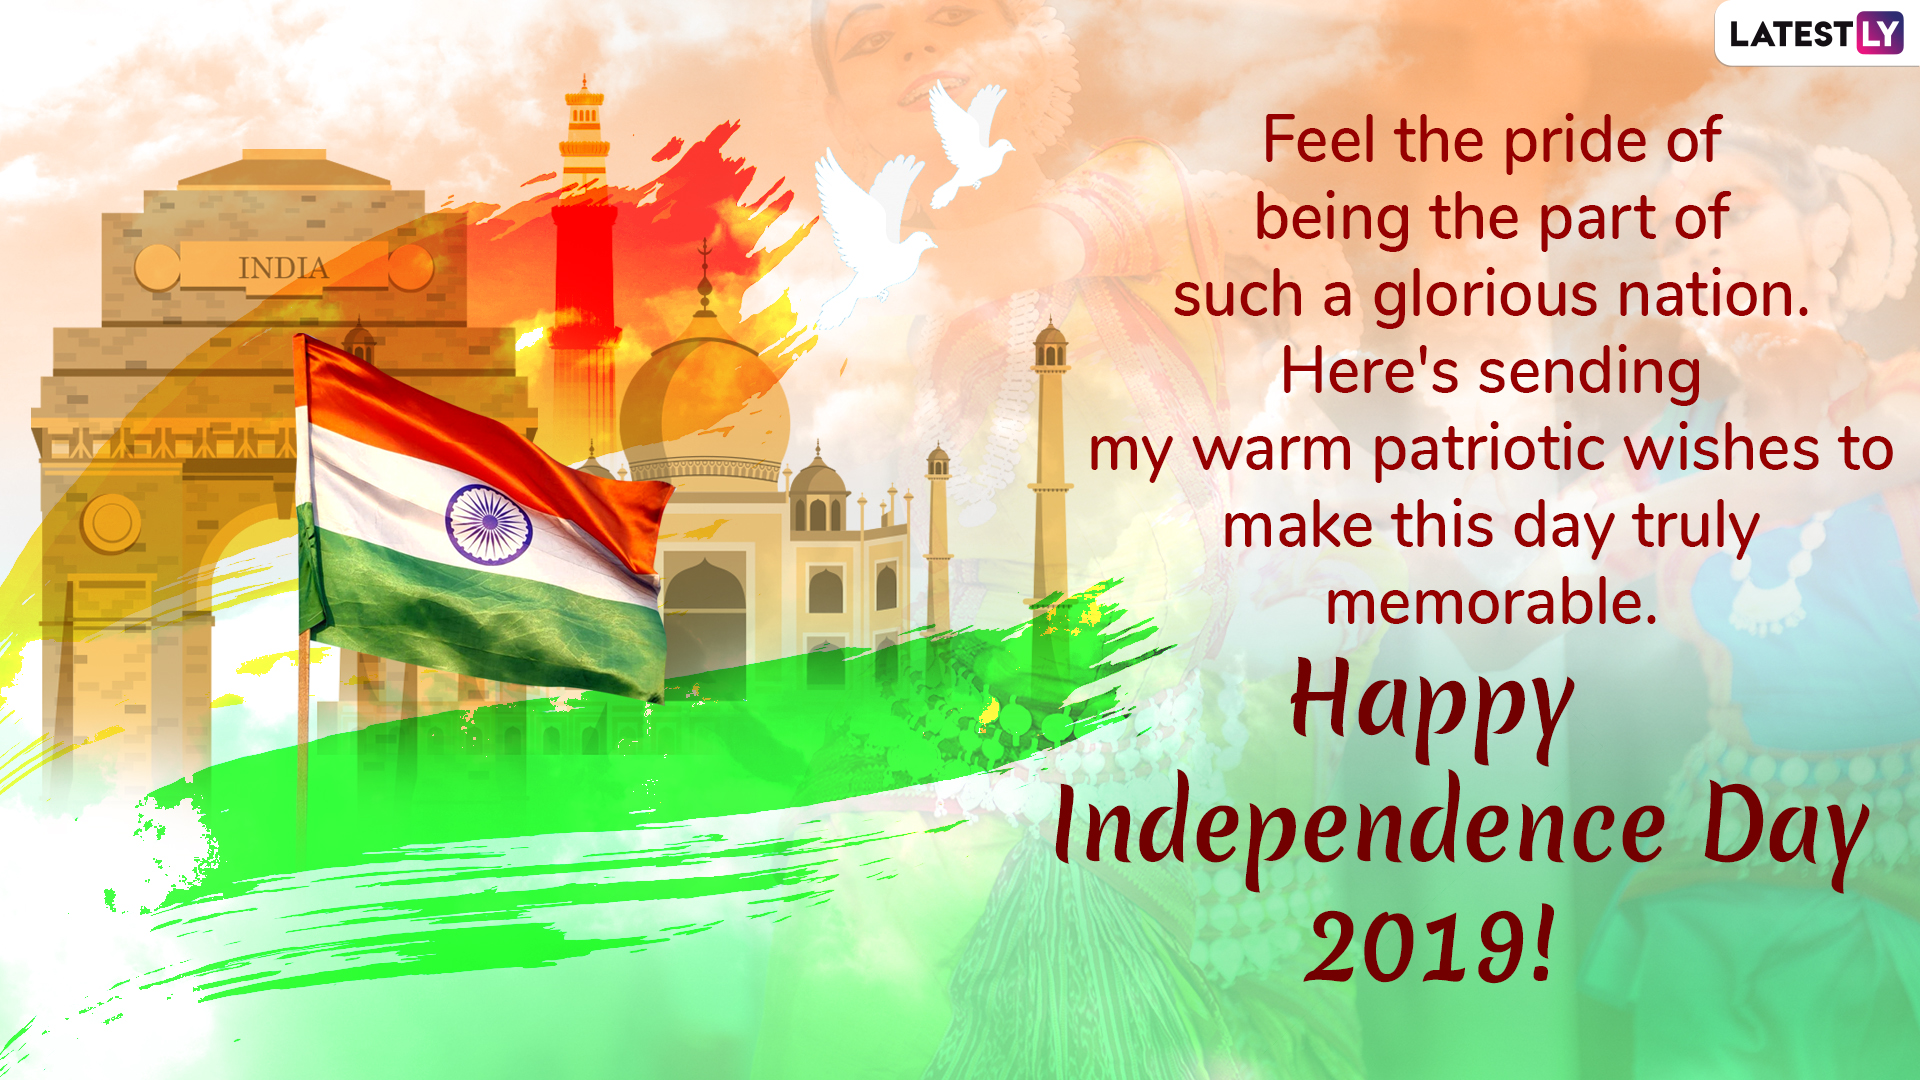 Happy Indian Independence Day 2019 Wishes Whatsapp Stickers Patriotic Quotes Images